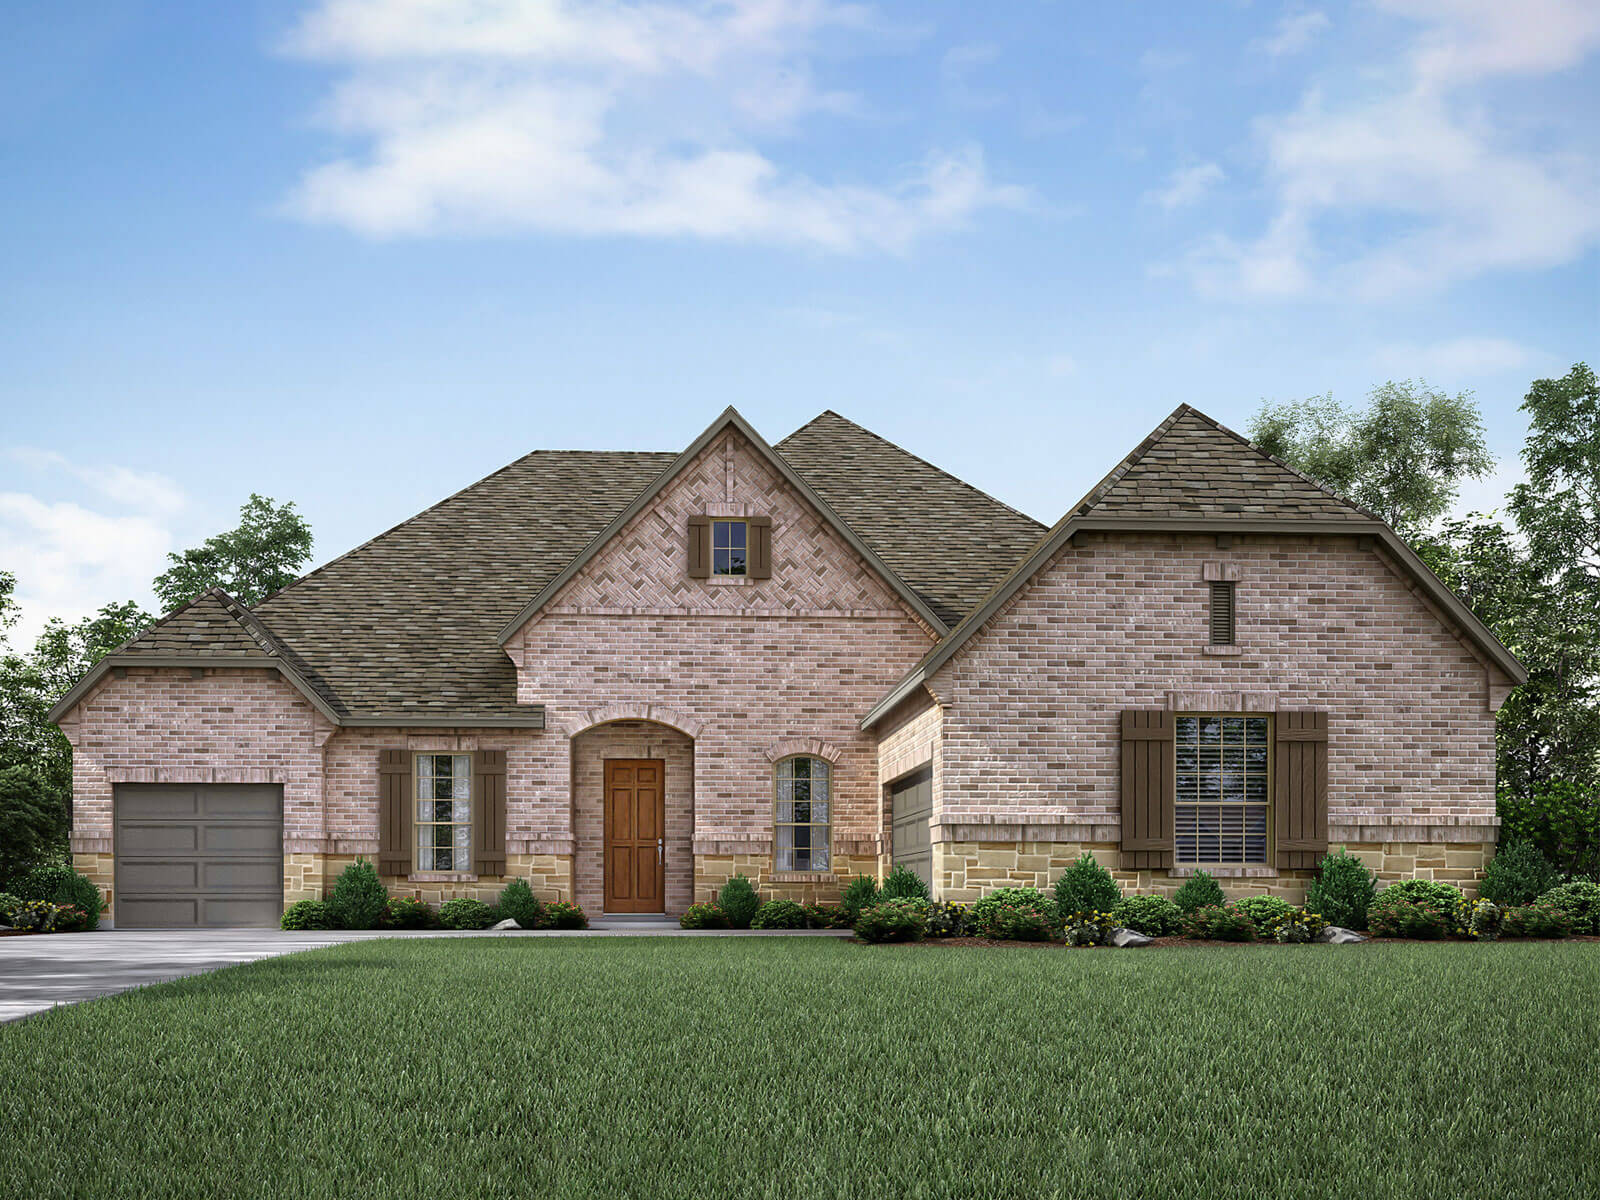 The Kennedy By Meritage Homes Floor Plan Friday Marr Team Realty Associates